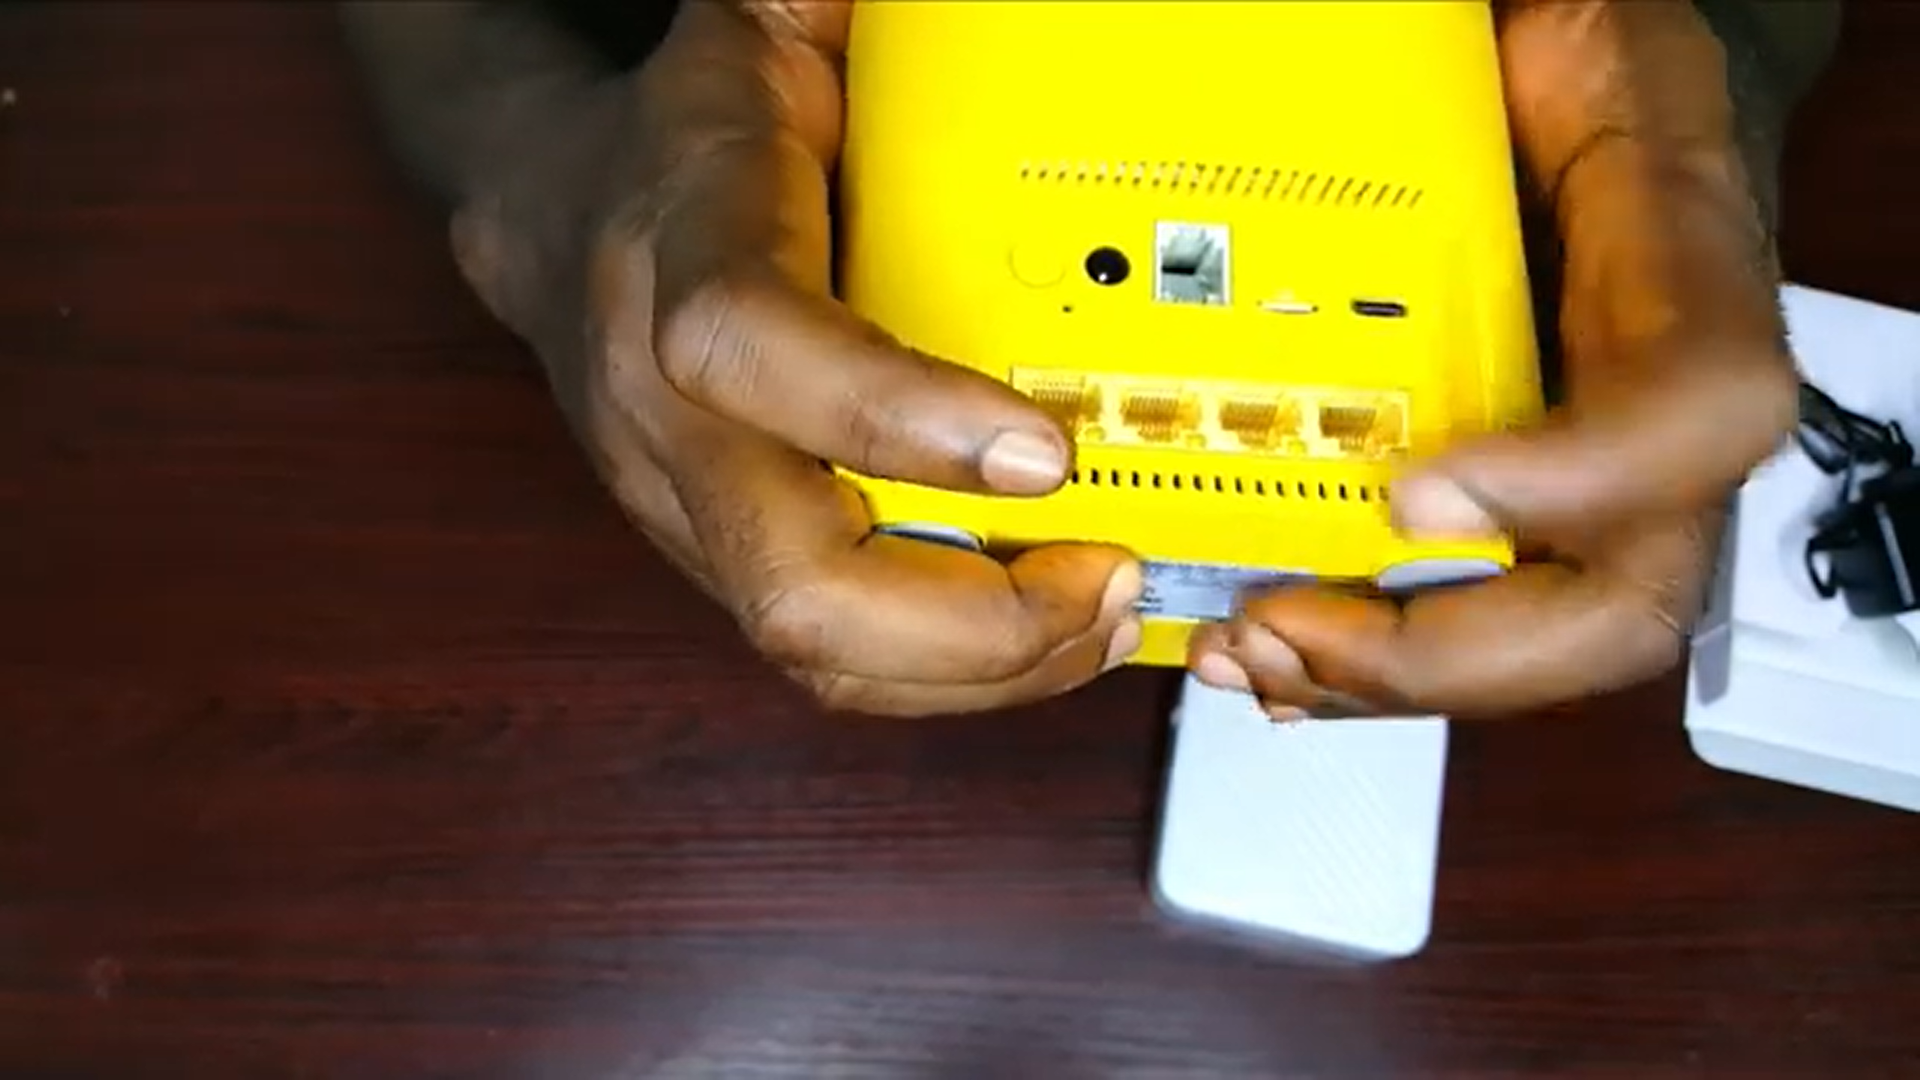 MTN Nigeria 5G Router - Set up and COnfiguration